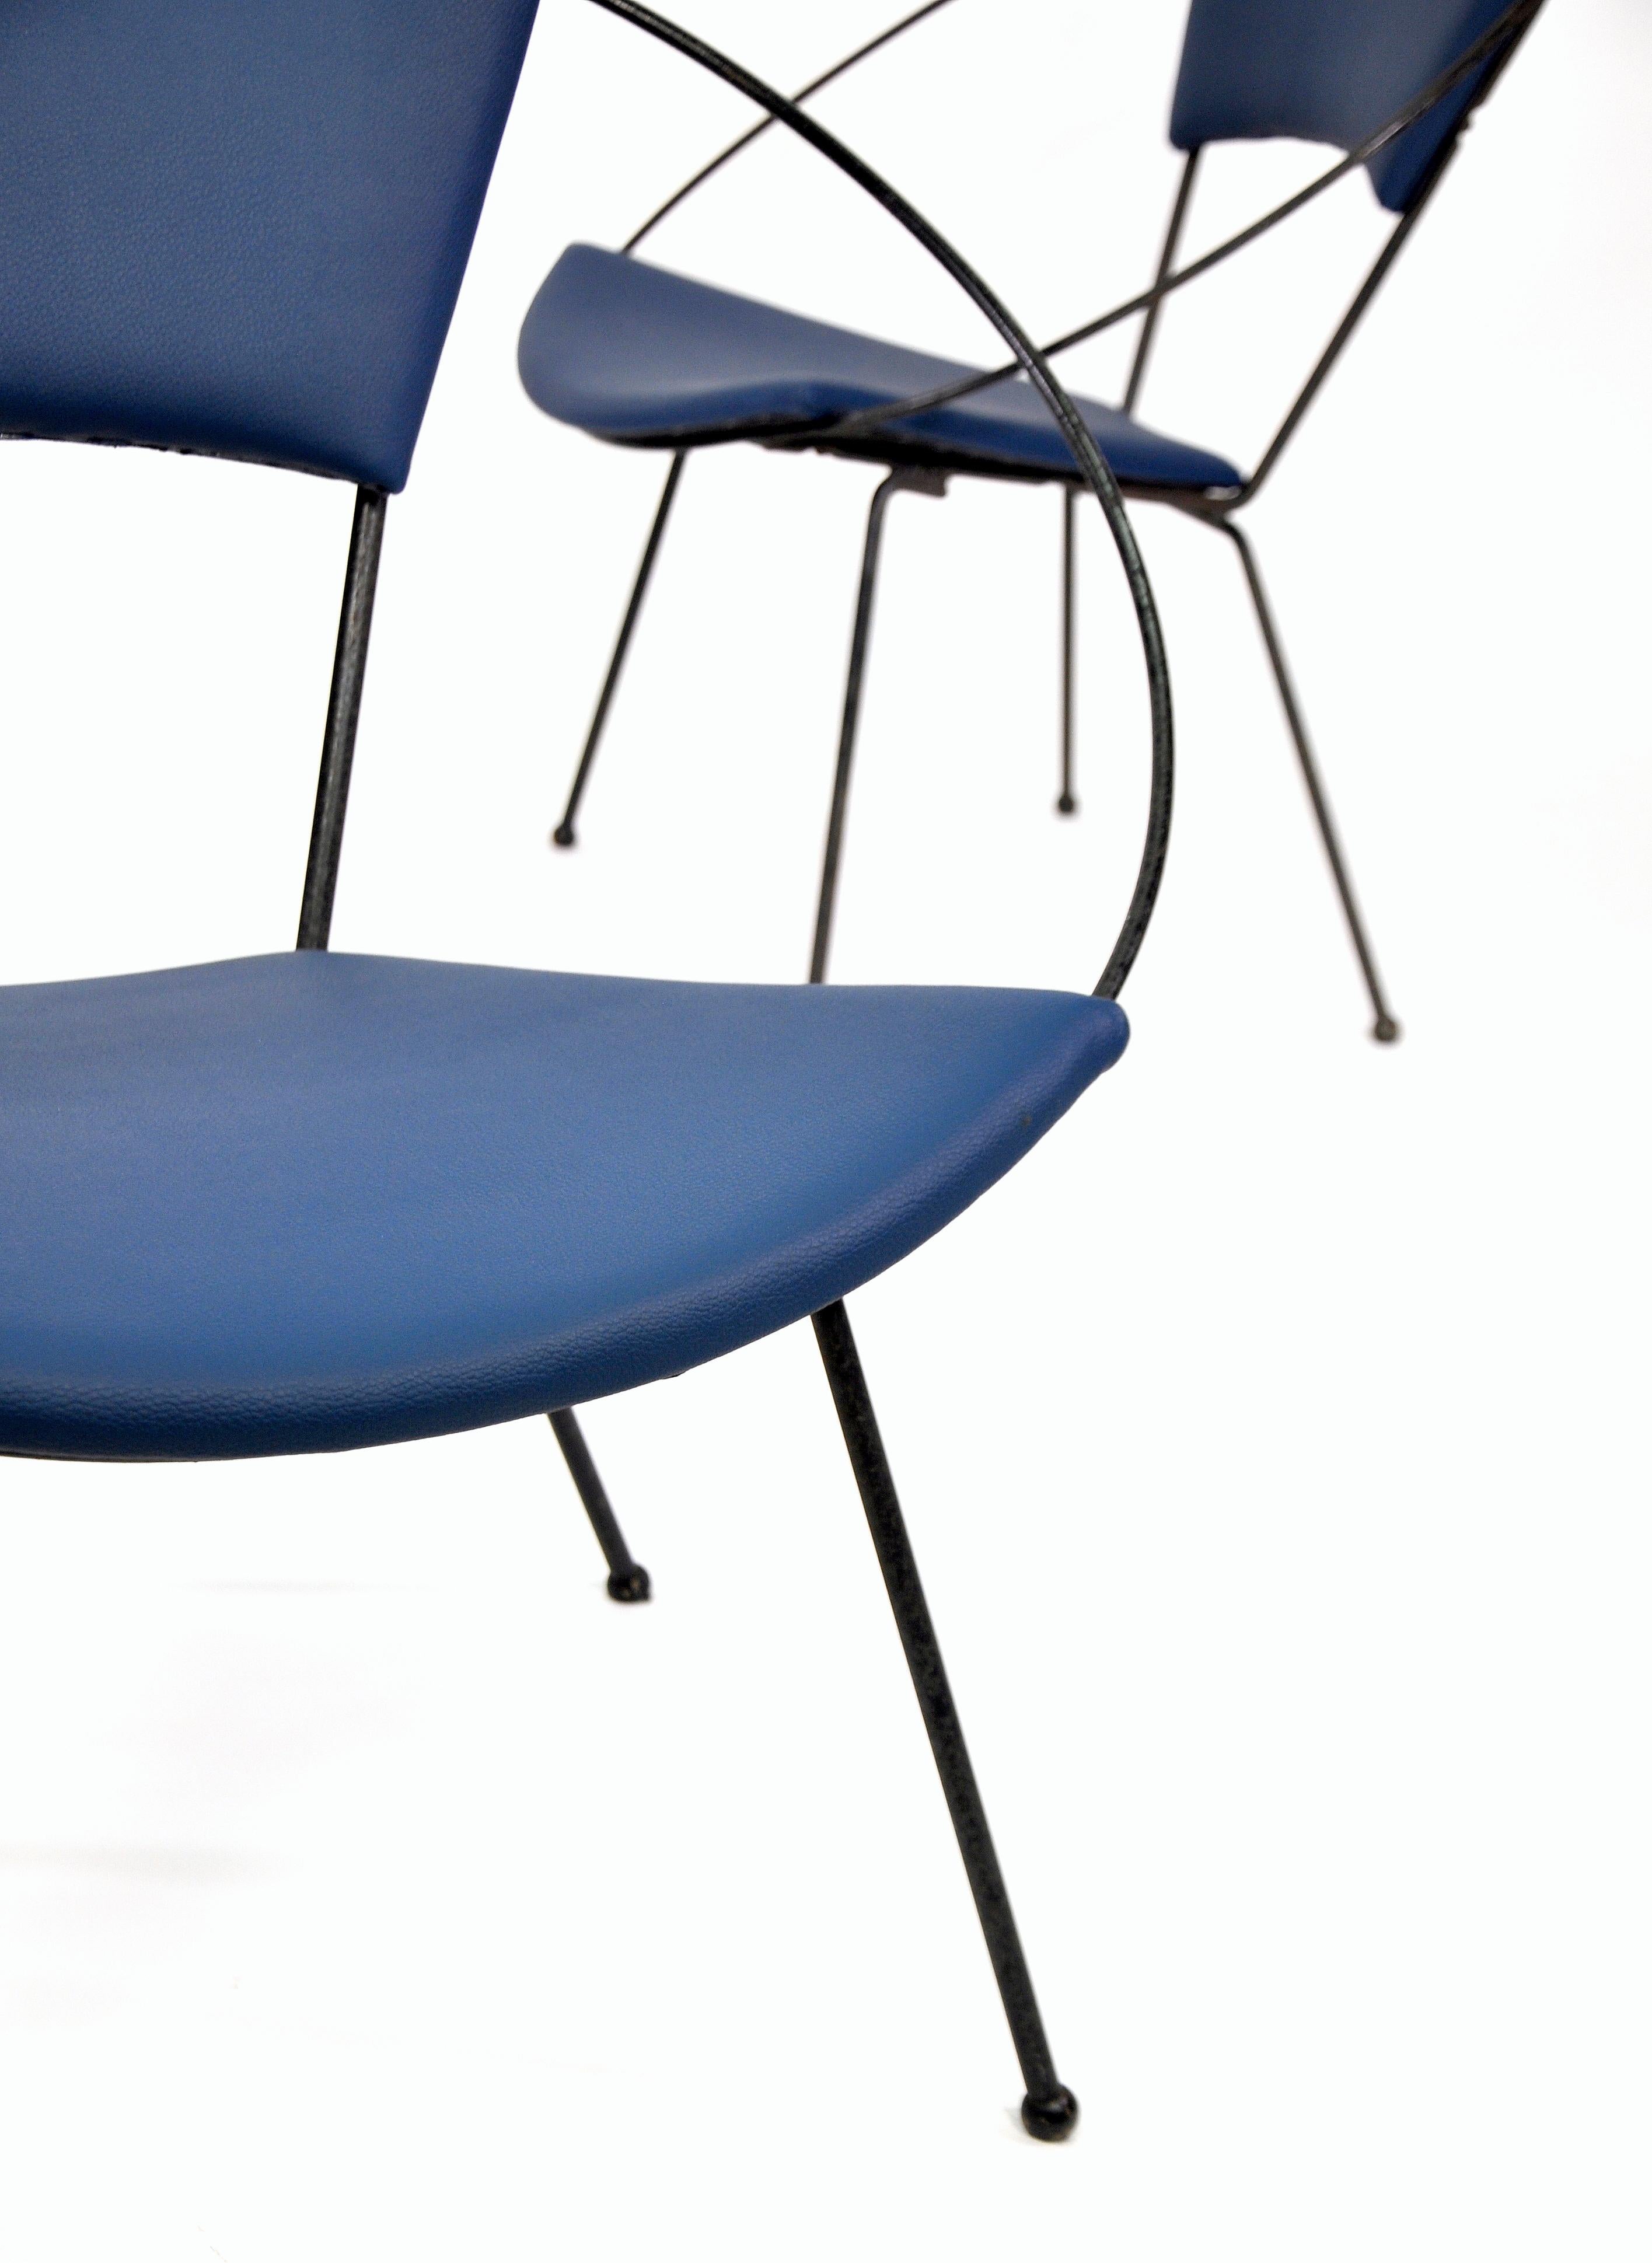 Vintage pair of Mid-Century Modern black wrought iron circle chairs from the 1950s, newly reupholstered in navy blue vinyl. Designed by Joseph Cicchelli for Reilly-Wolff, the armchairs were touted as an innovation in design and comfort at the time.